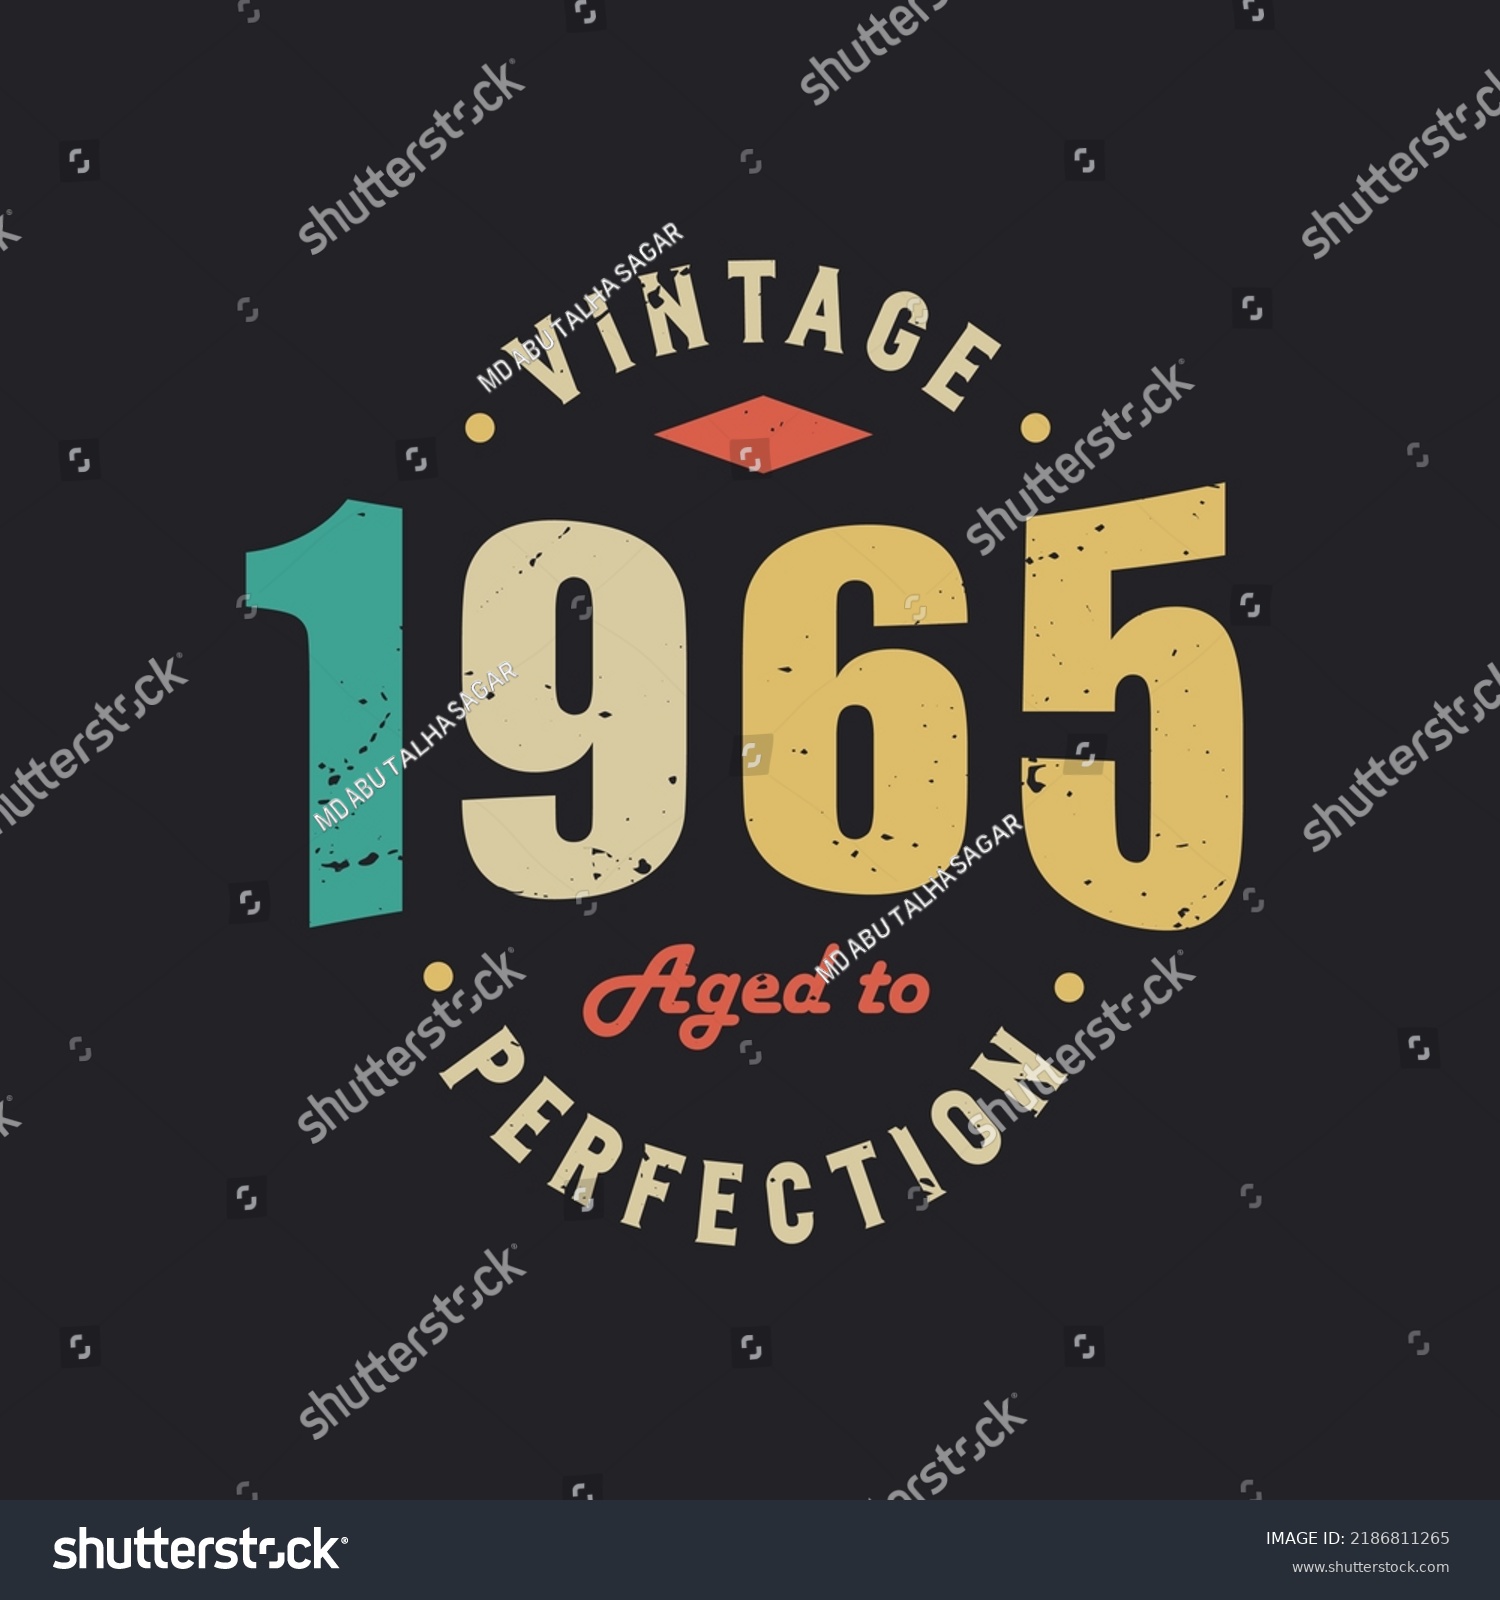 SVG of Vintage 1965 Aged to Perfection. 1965 Vintage Retro Birthday svg